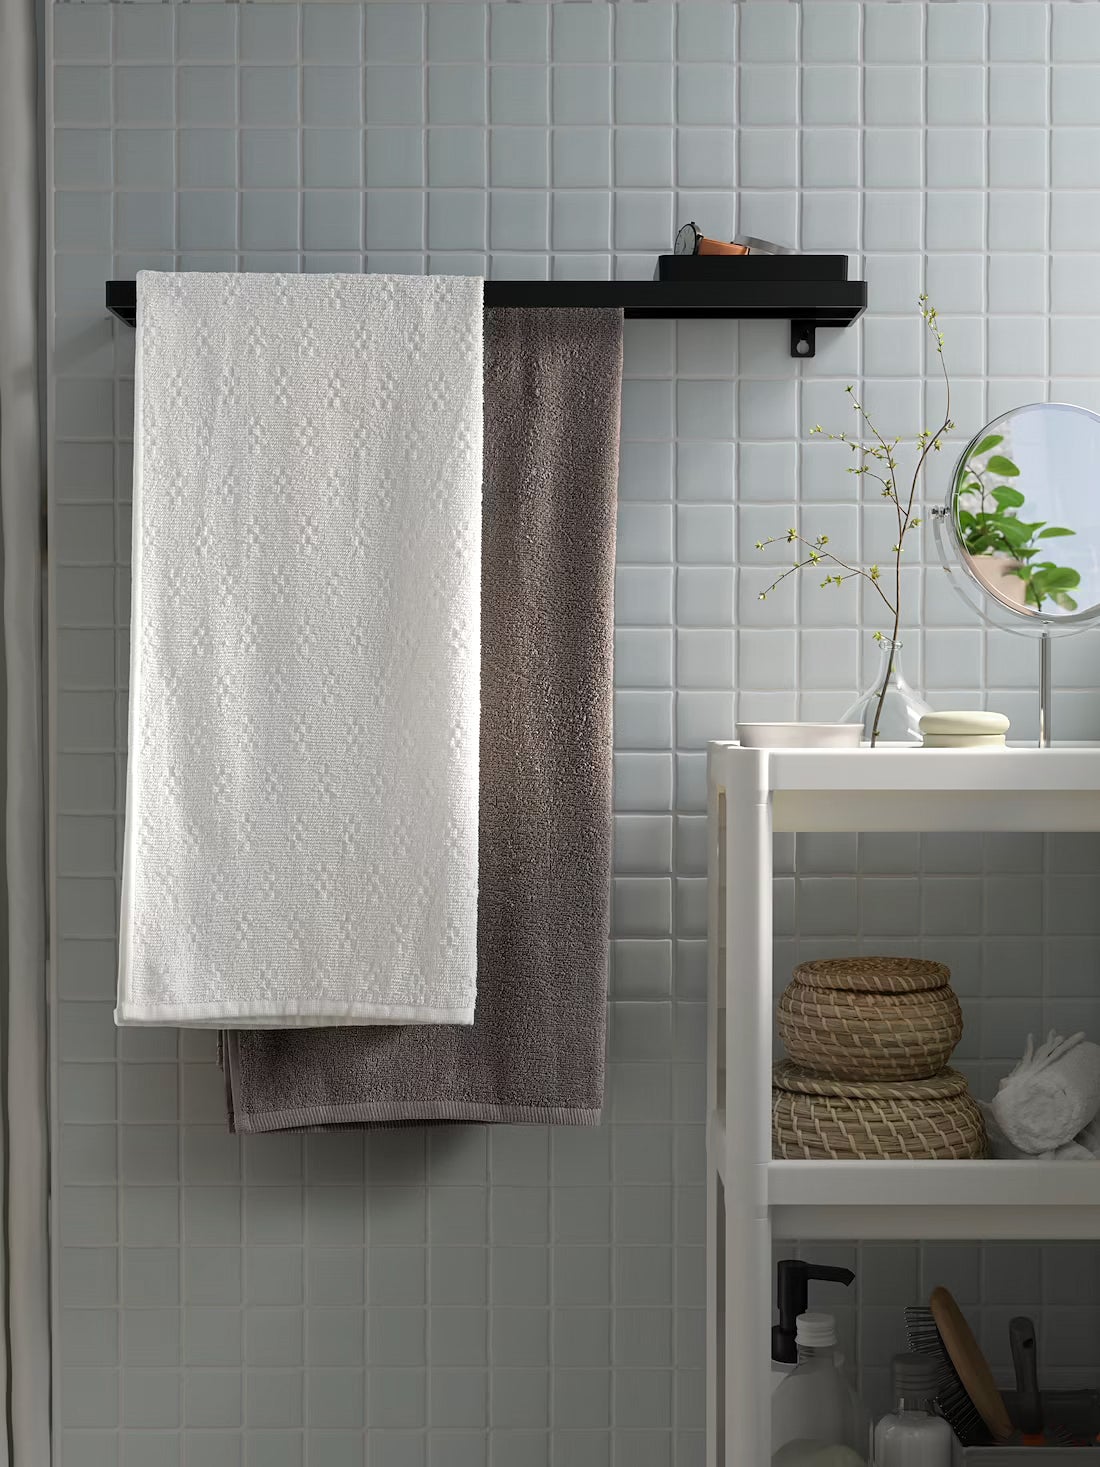 14 Bathroom IKEA Hacks That Actually Work in Small Spaces